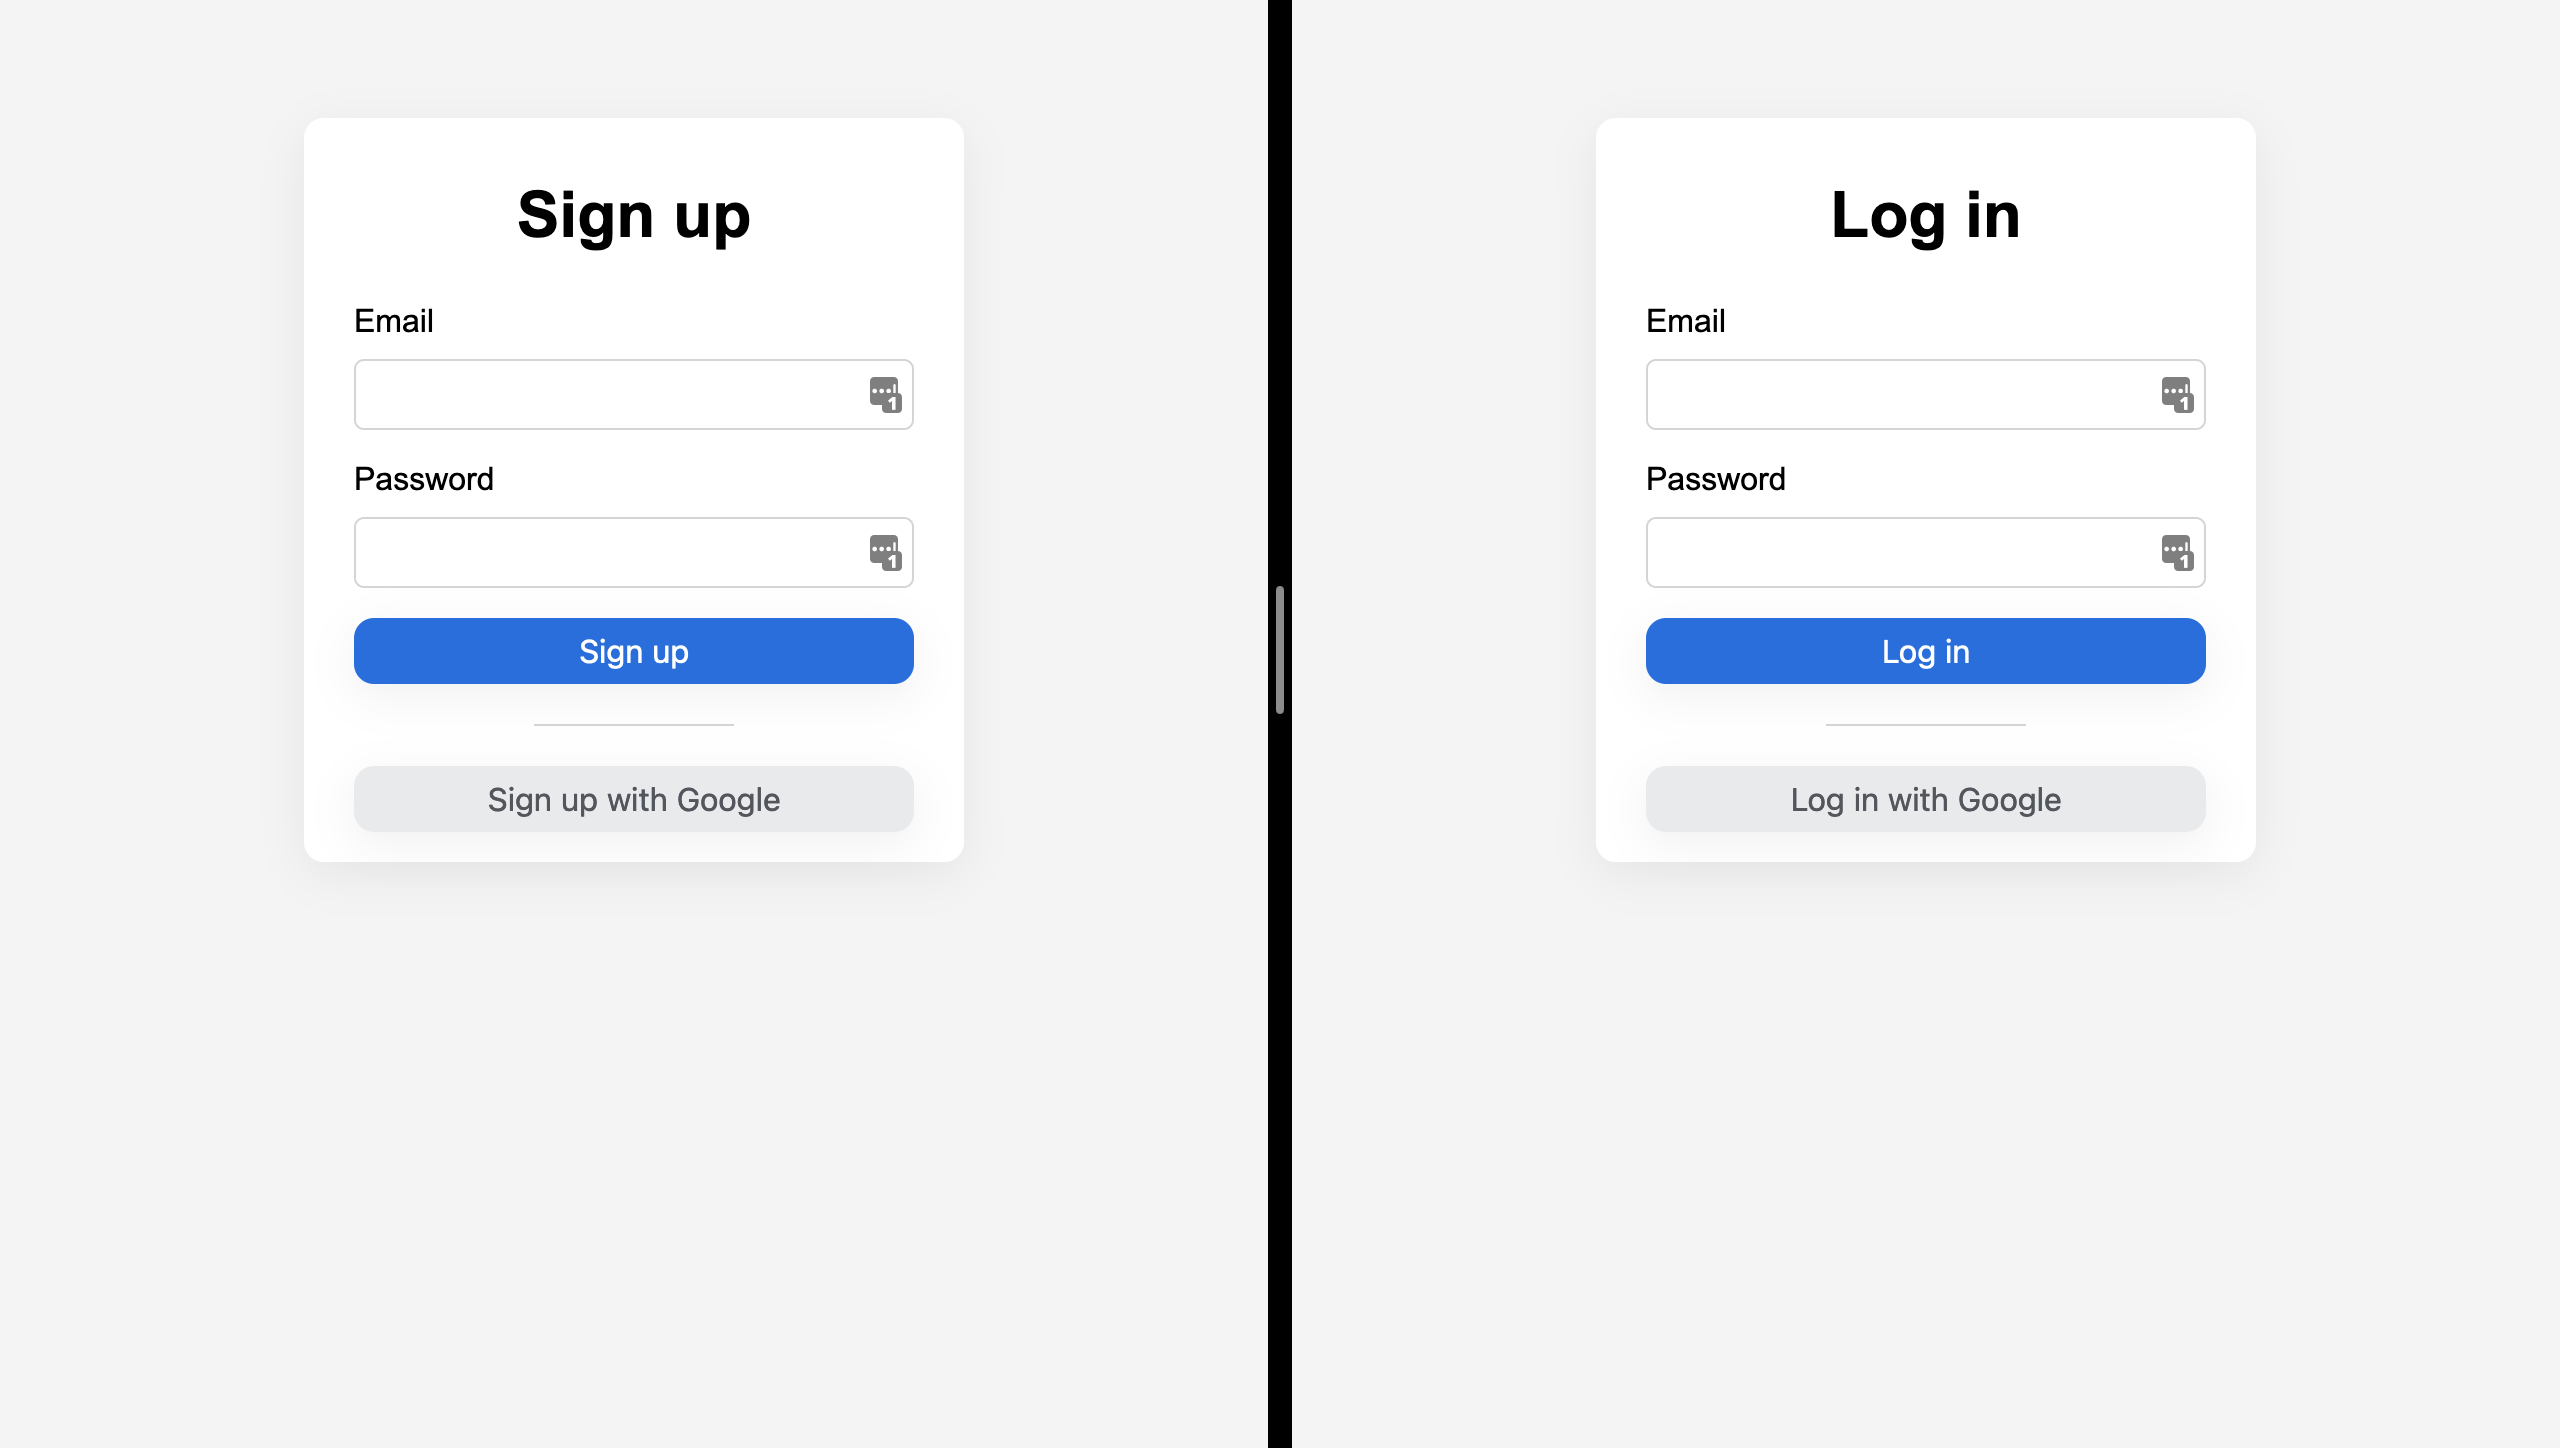 Registration and login pages